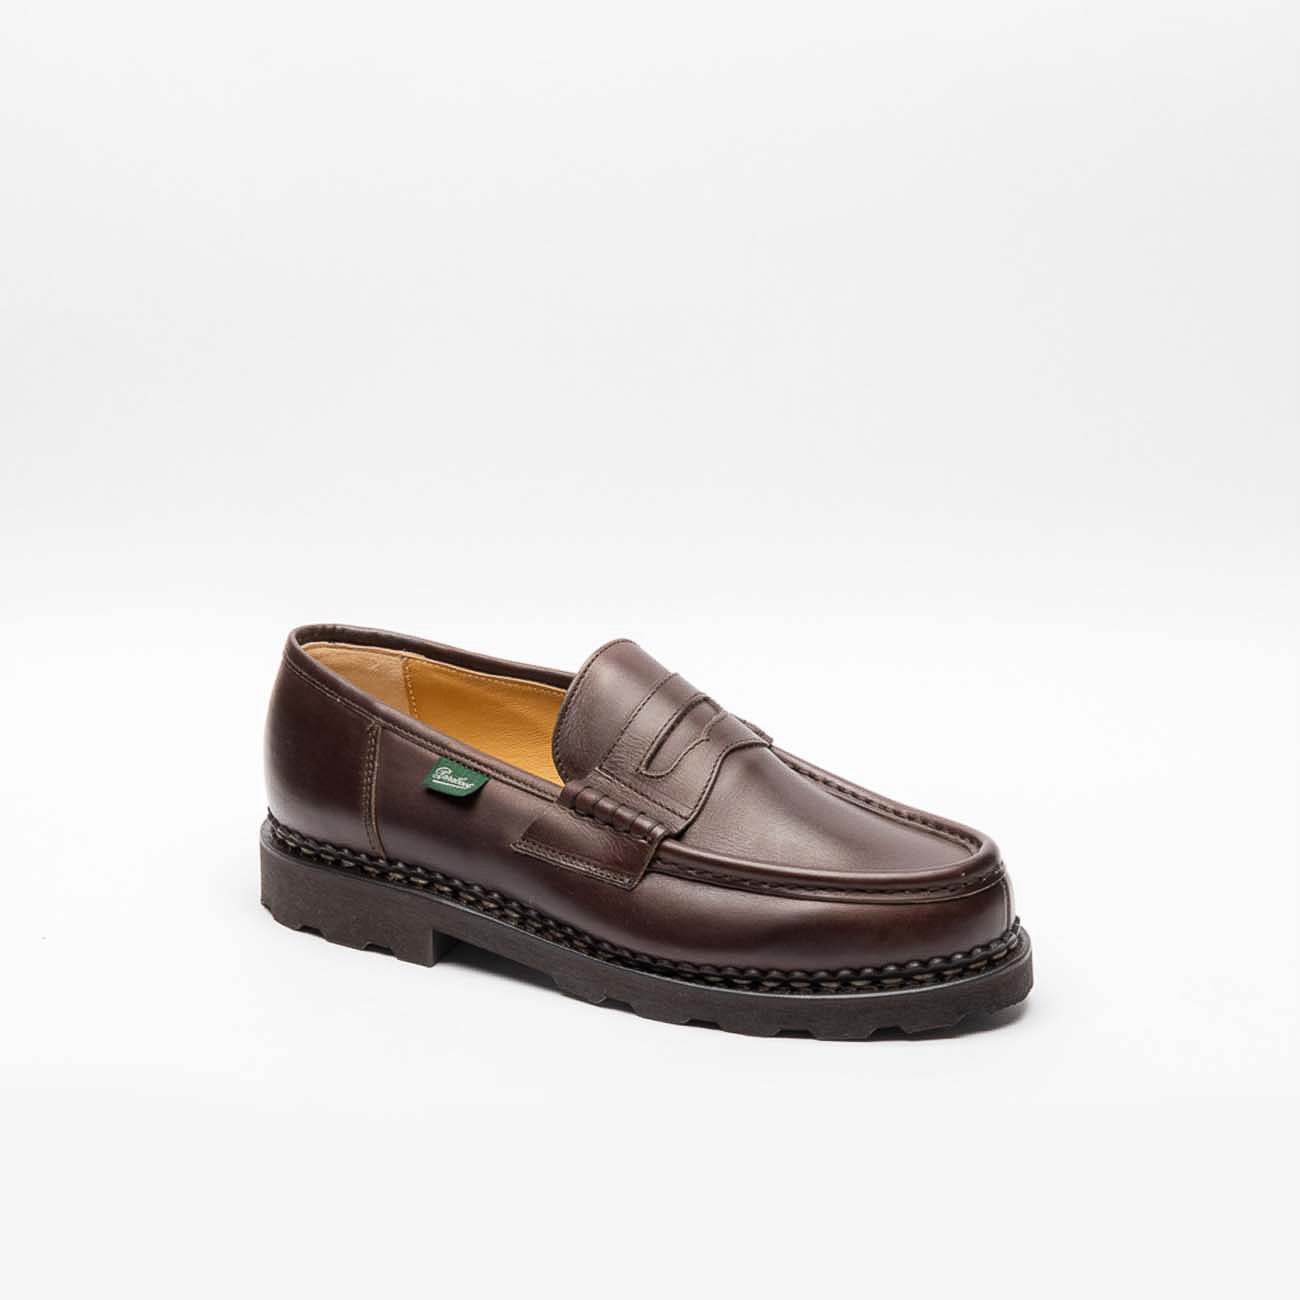 Paraboot brown calf loafer